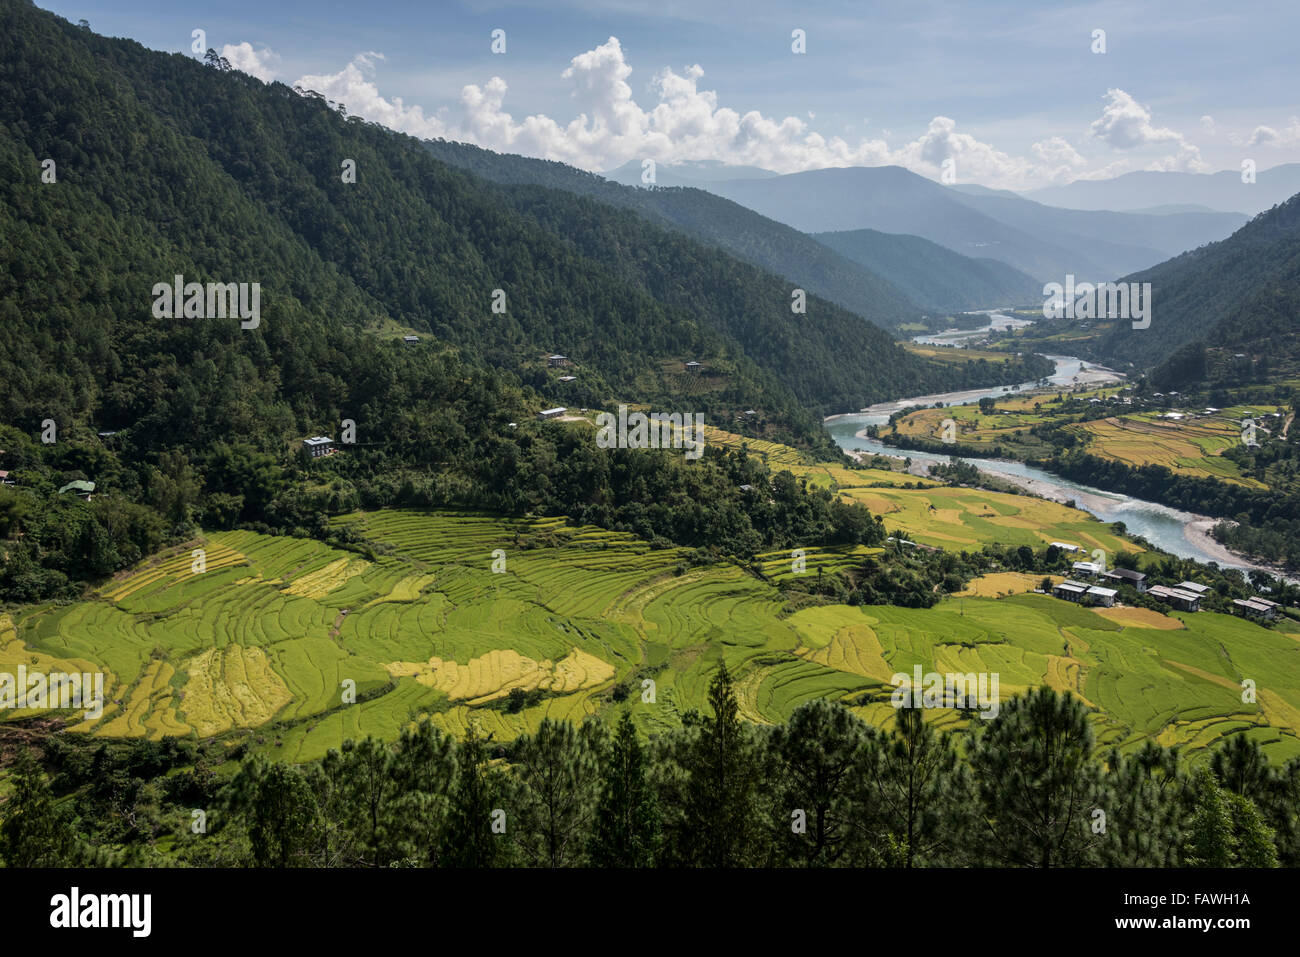 River flowing through a valley with lush farmland surrounded by mountains; Thimphu, Bhutan Stock Photo